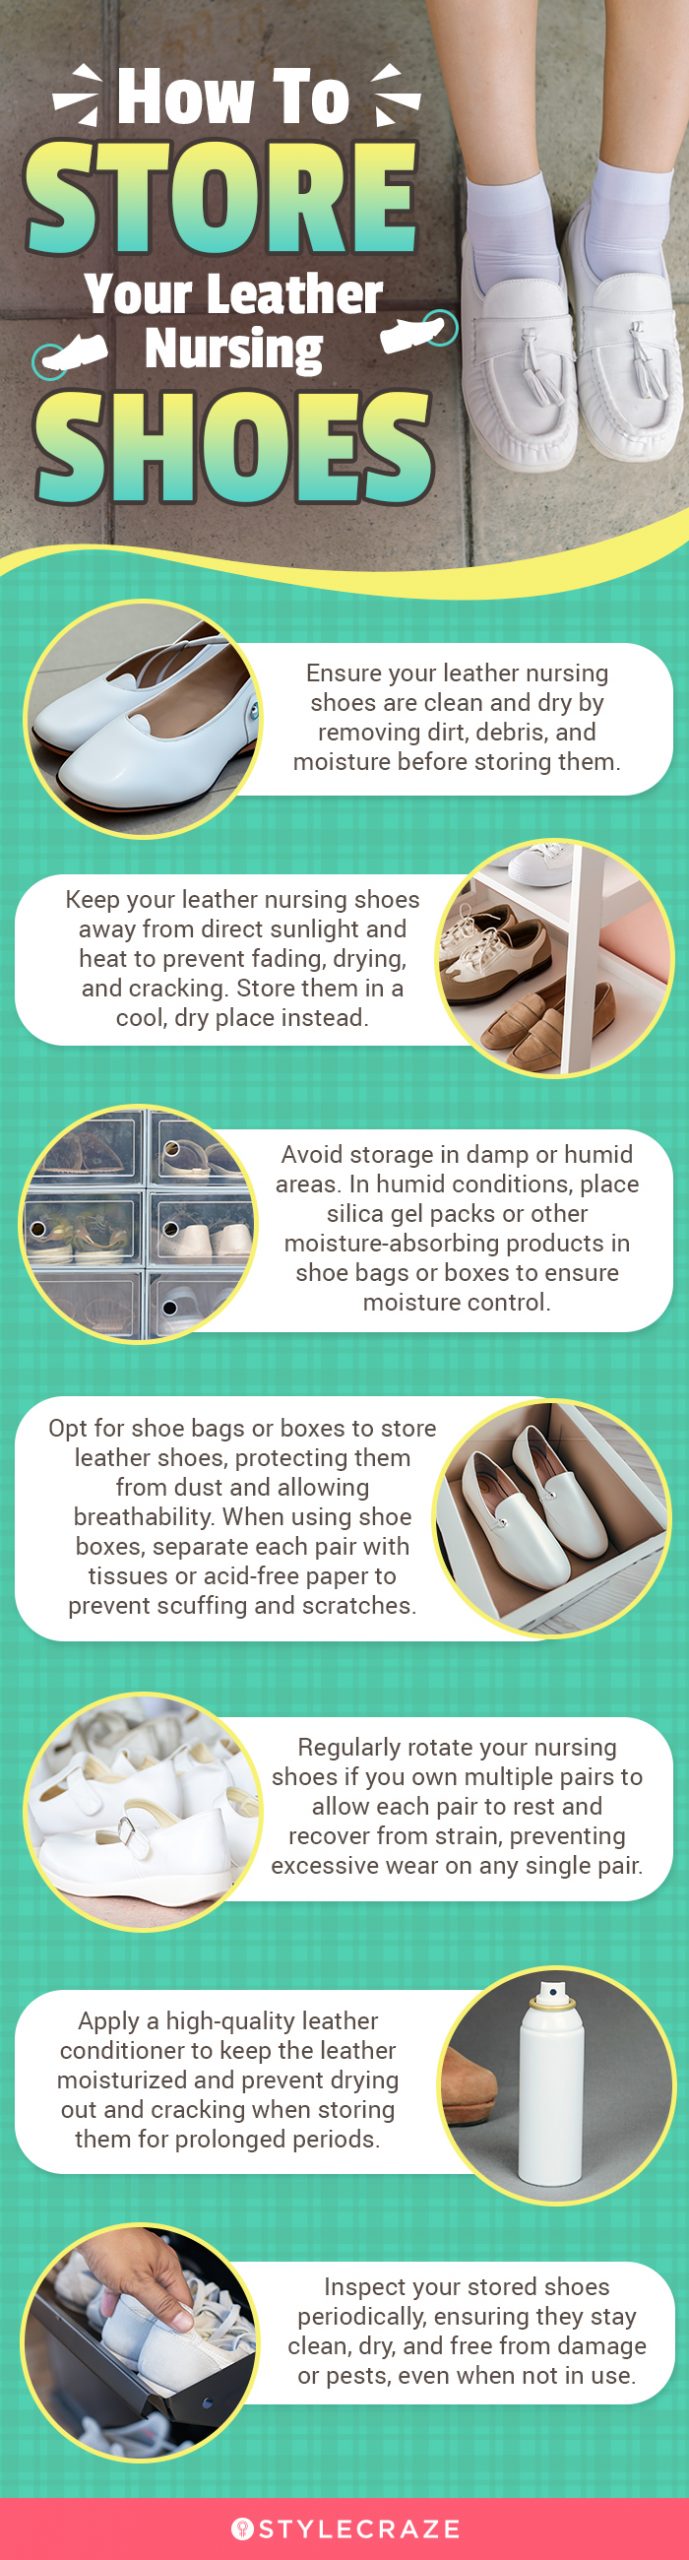 How To Store Your Leather Nursing Shoes (infographic)